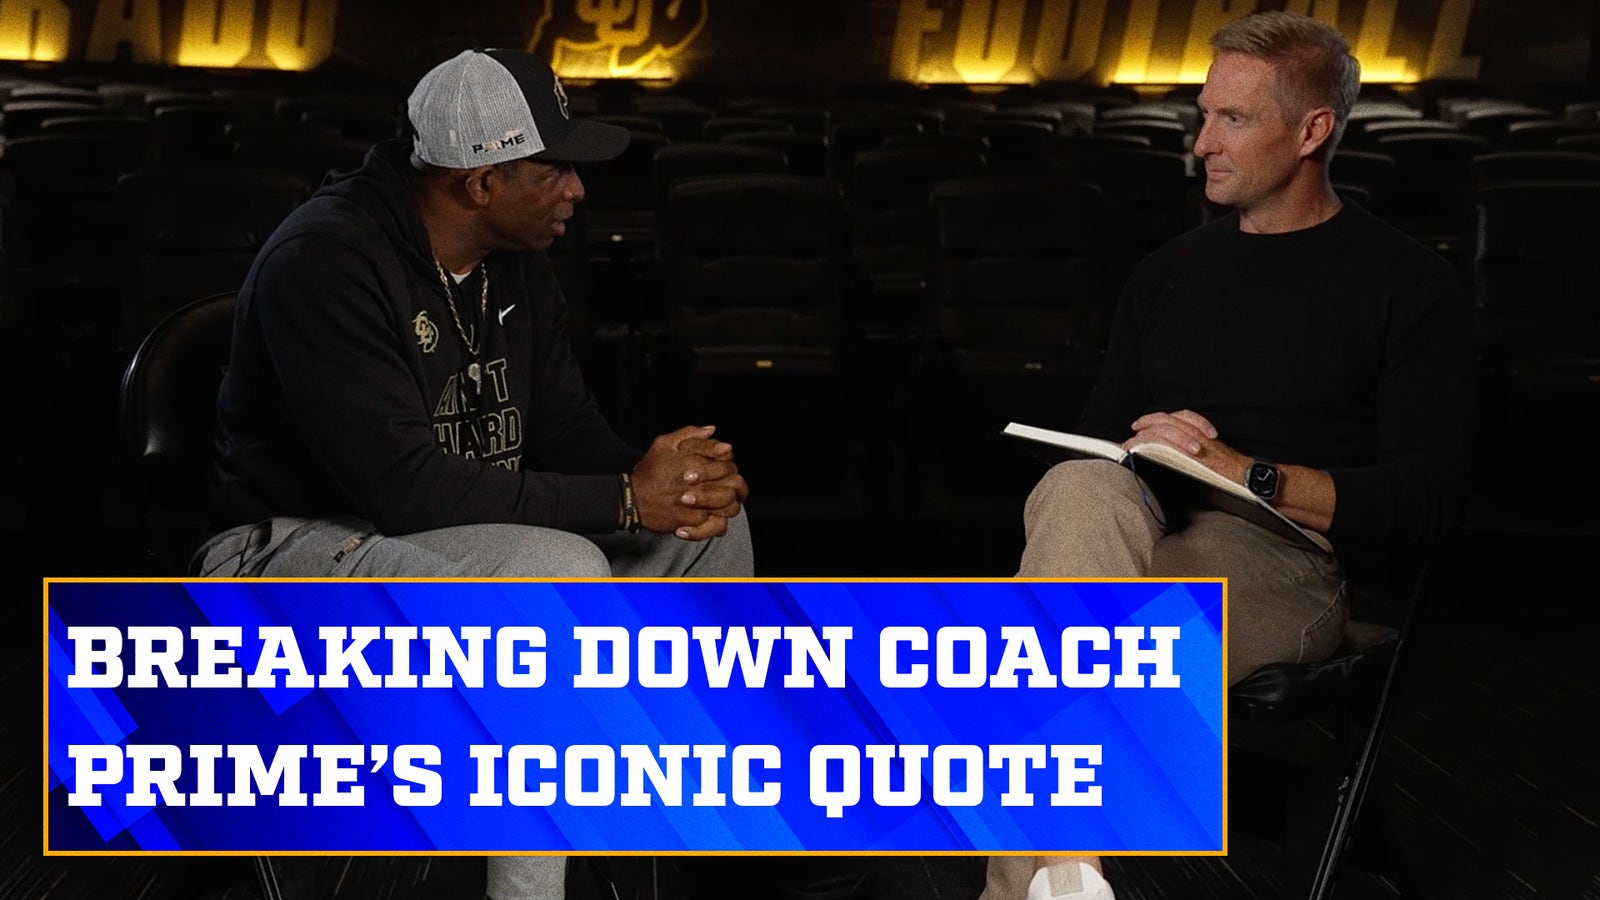 Coach Prime breaks down his iconic comment from his first press conference